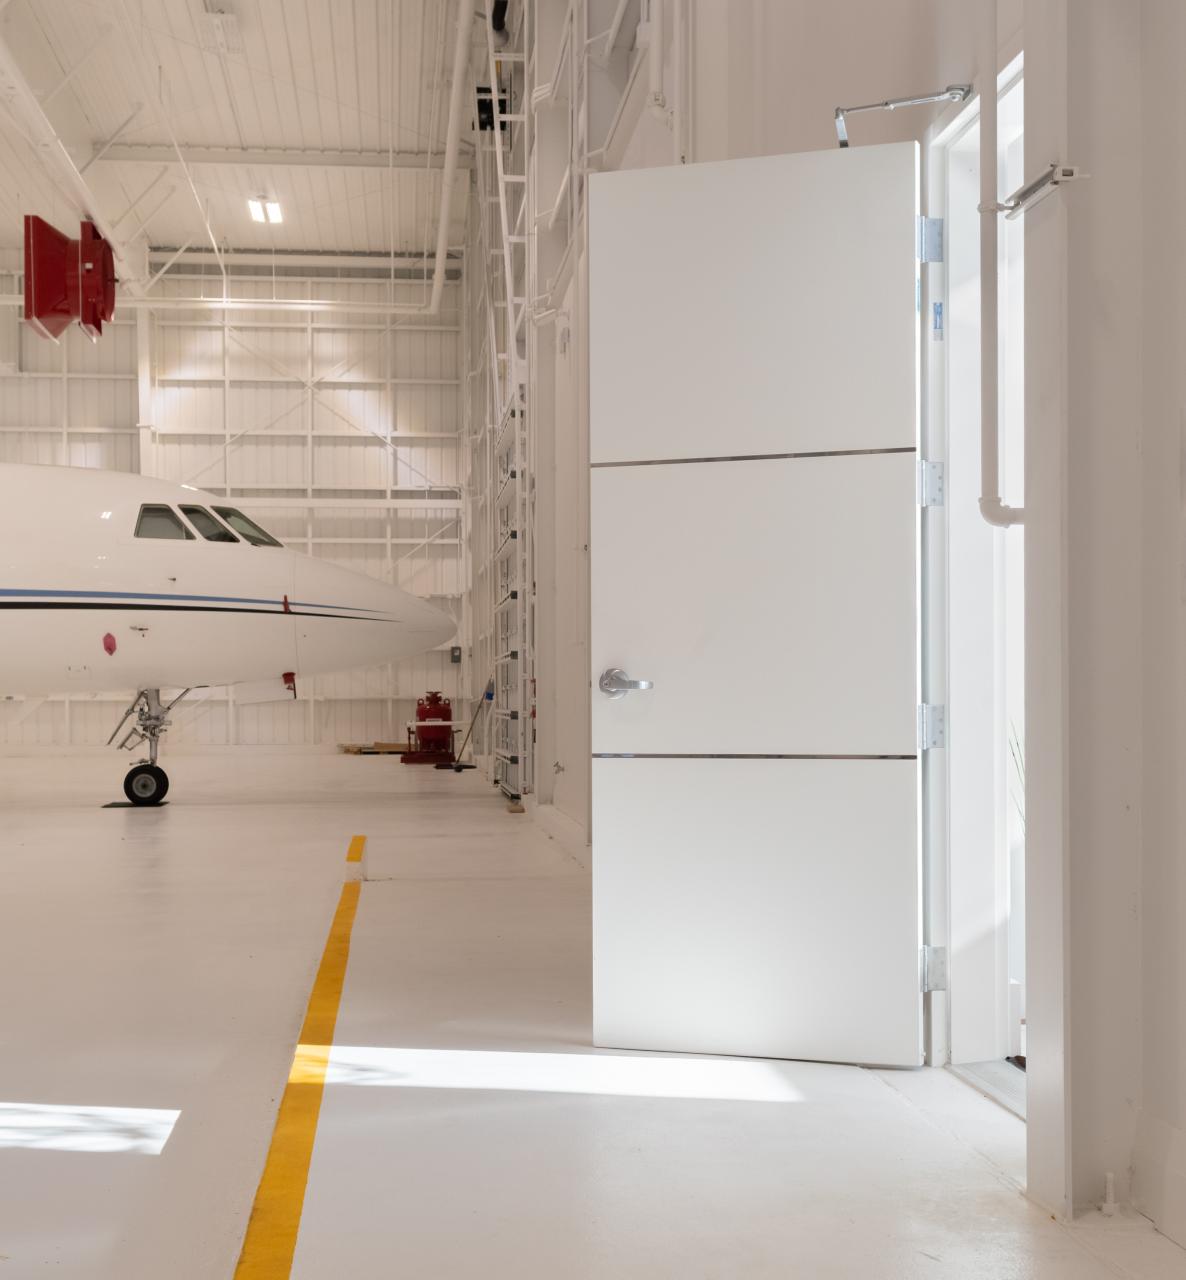 The lounge of this this private jet hangar features TMIR3000 doors in MDF with ½" bright stainless steel inlays.